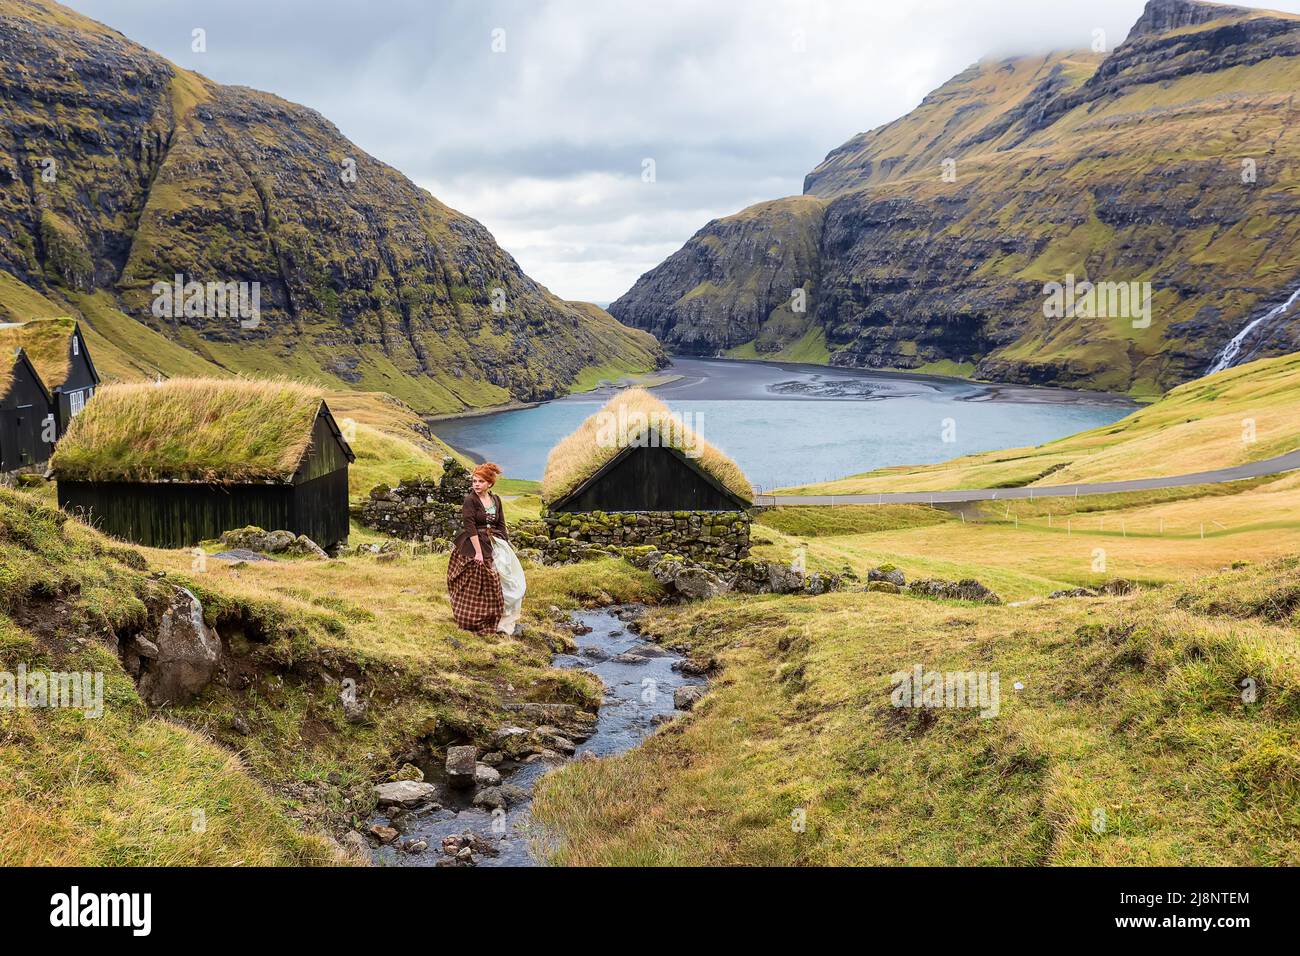 A young redhead woman sits near a stone fence in old-fashioned clothes. Saksun village and sandy shore of the lagoon with an azure lake and dramatic c Stock Photo